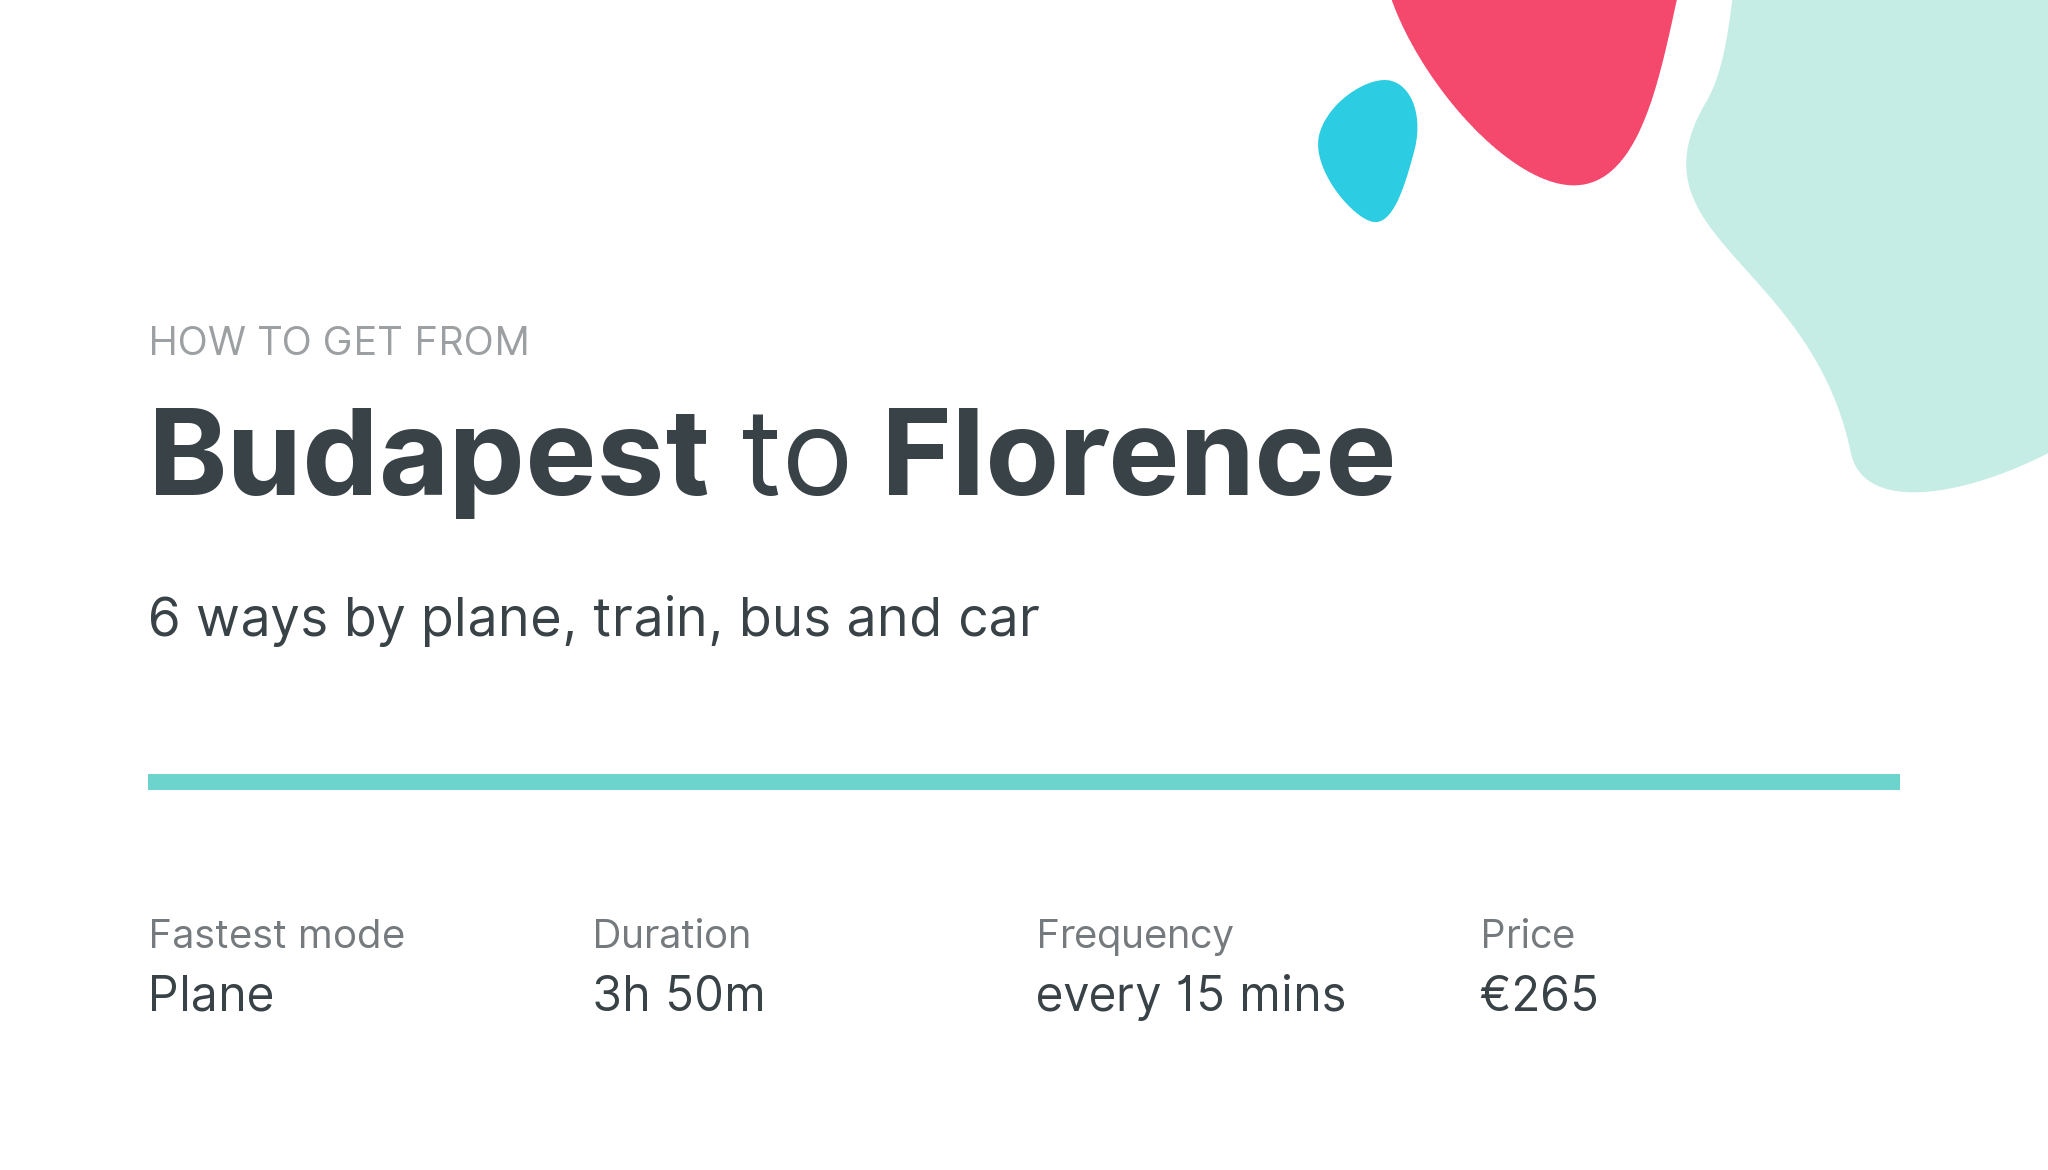 How do I get from Budapest to Florence